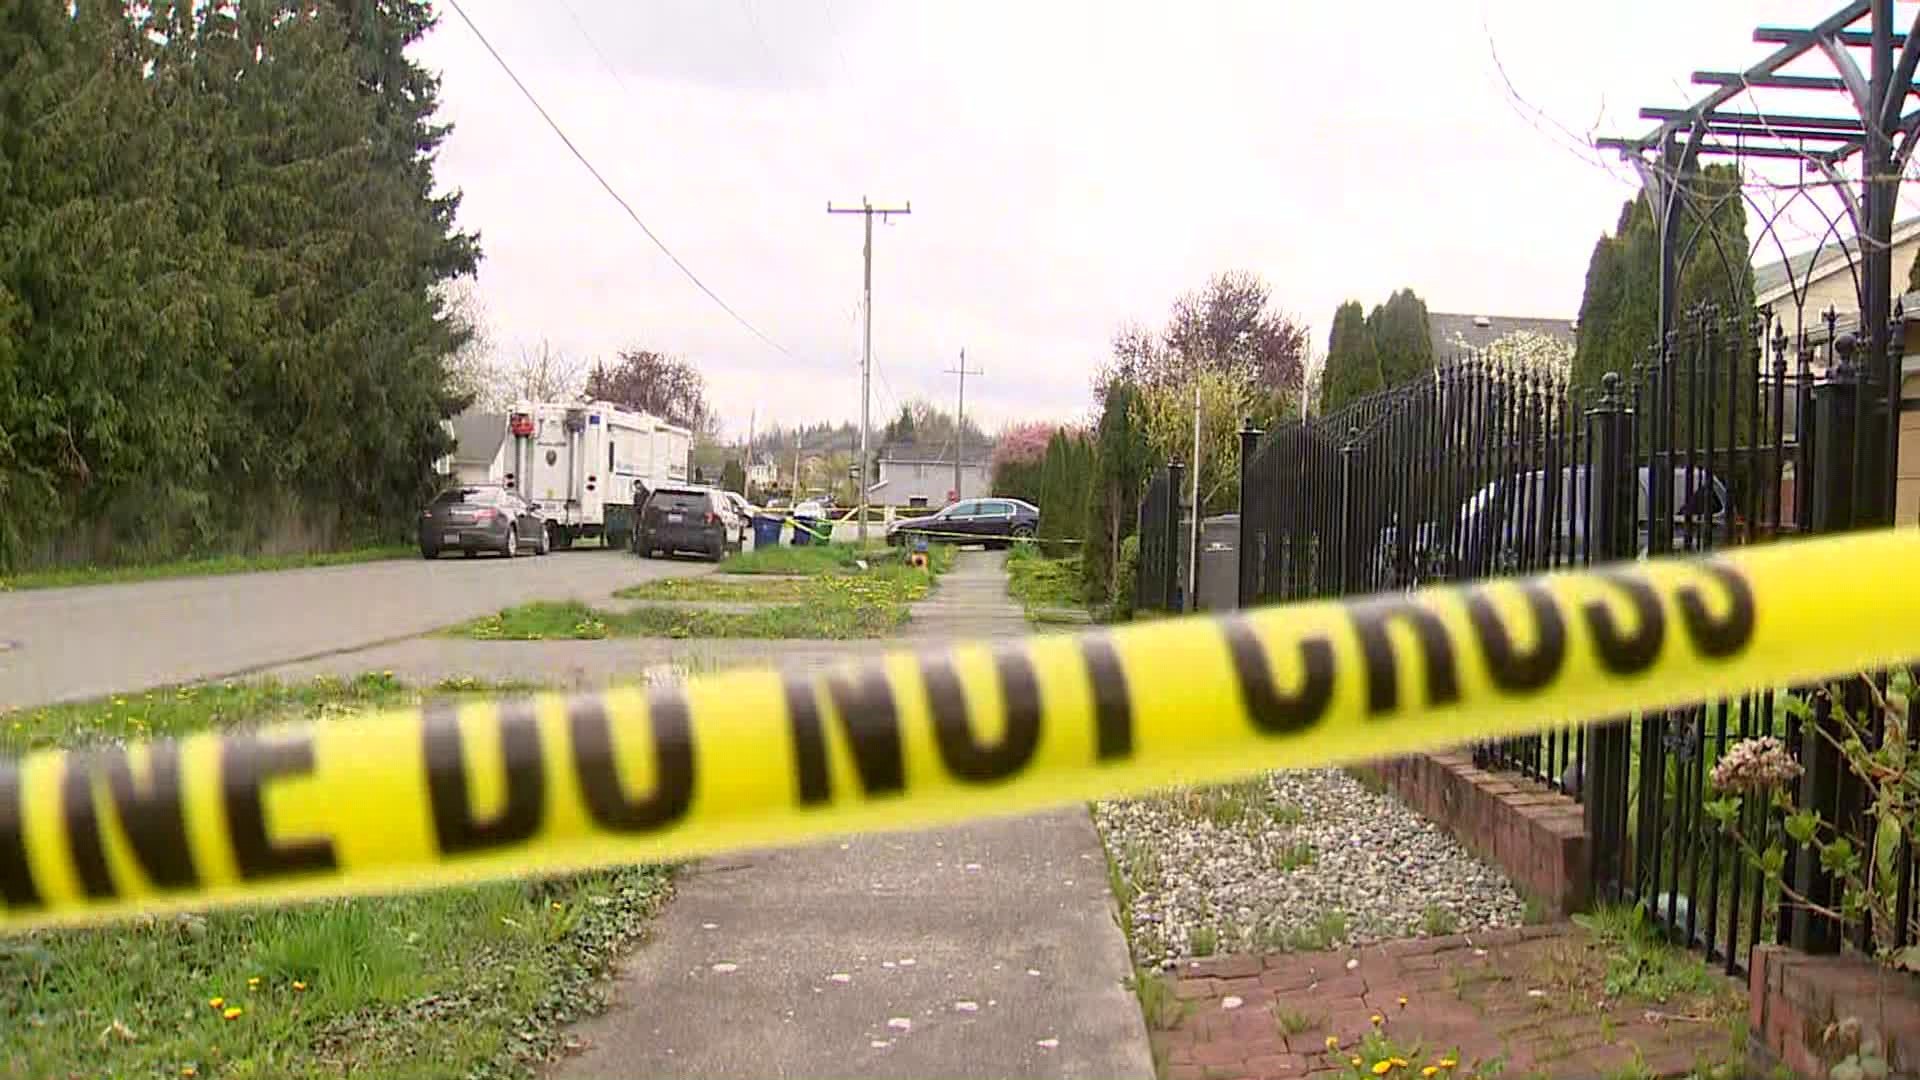 Detectives are investigating after a toddler was reportedly shot and taken to a nearby fire station Friday morning, according to the Tukwila Police Department.